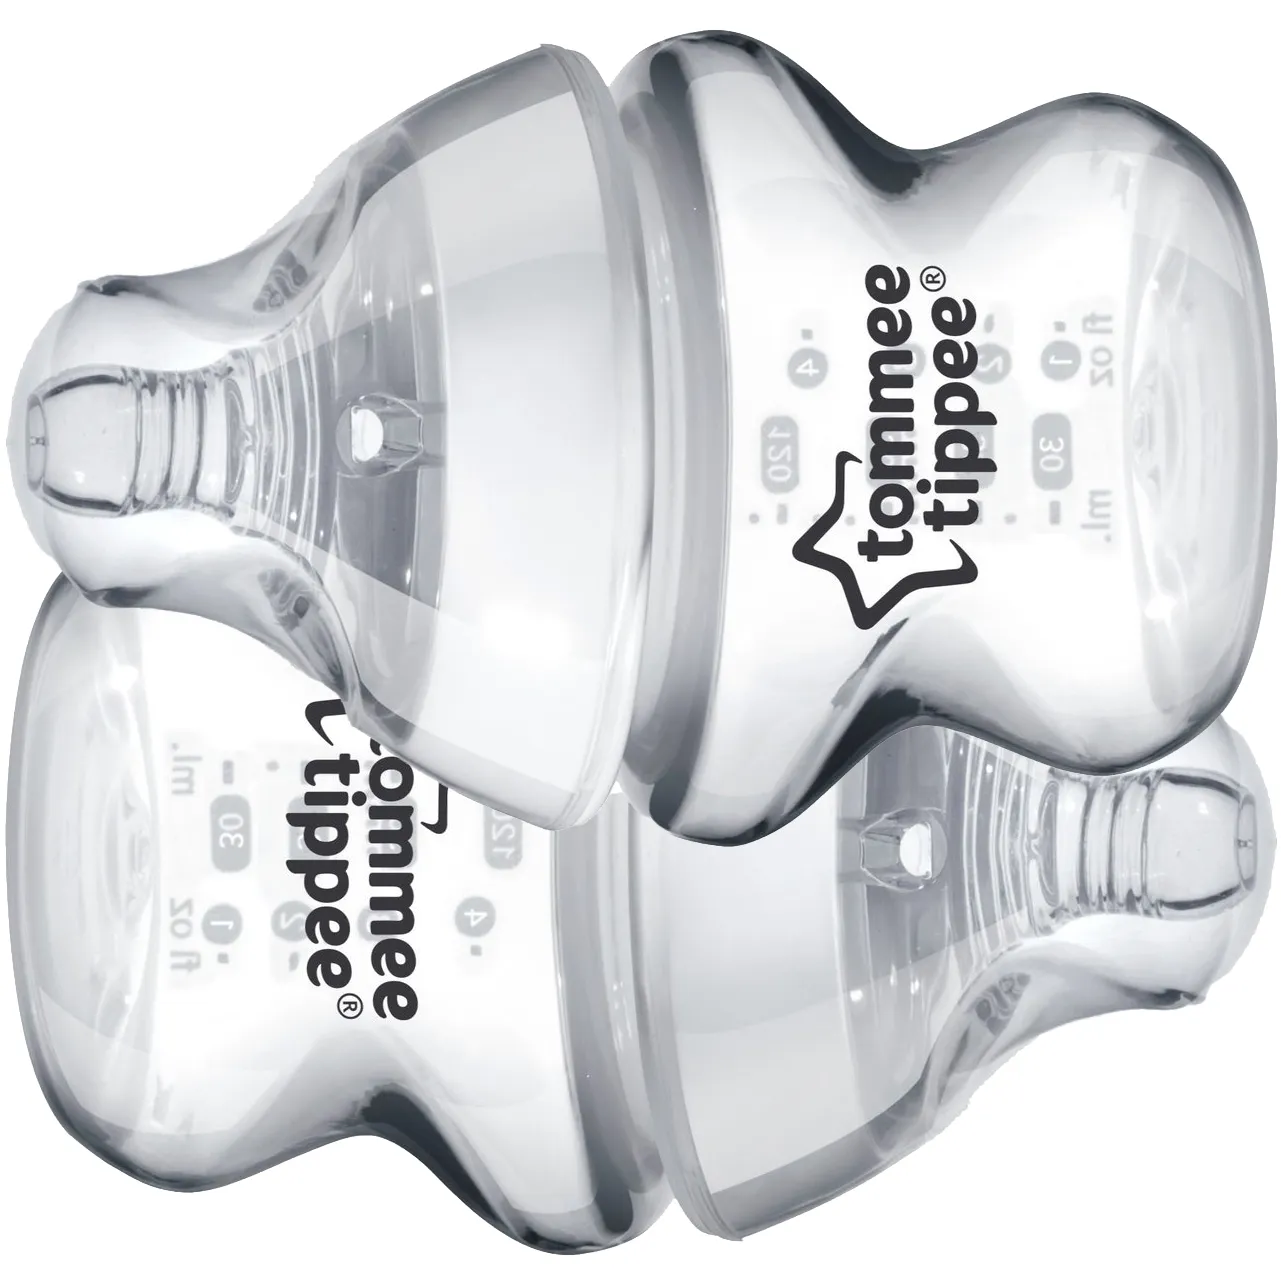 Free Tommee Tippee Products